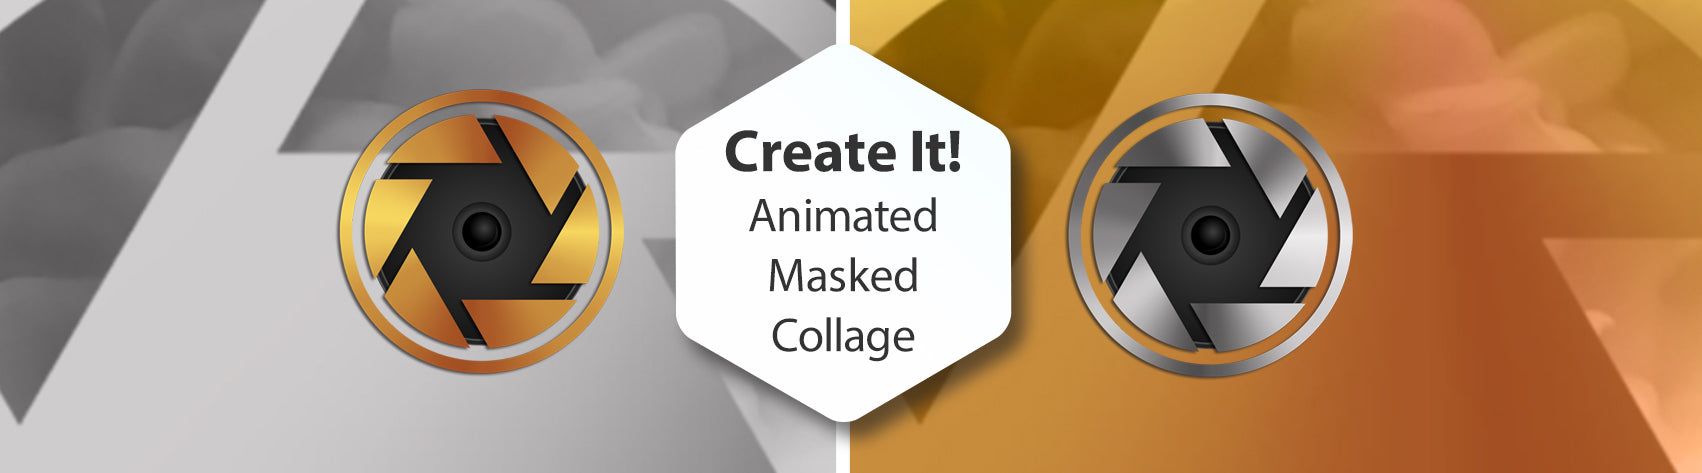 Create It! Animated Masked Collage